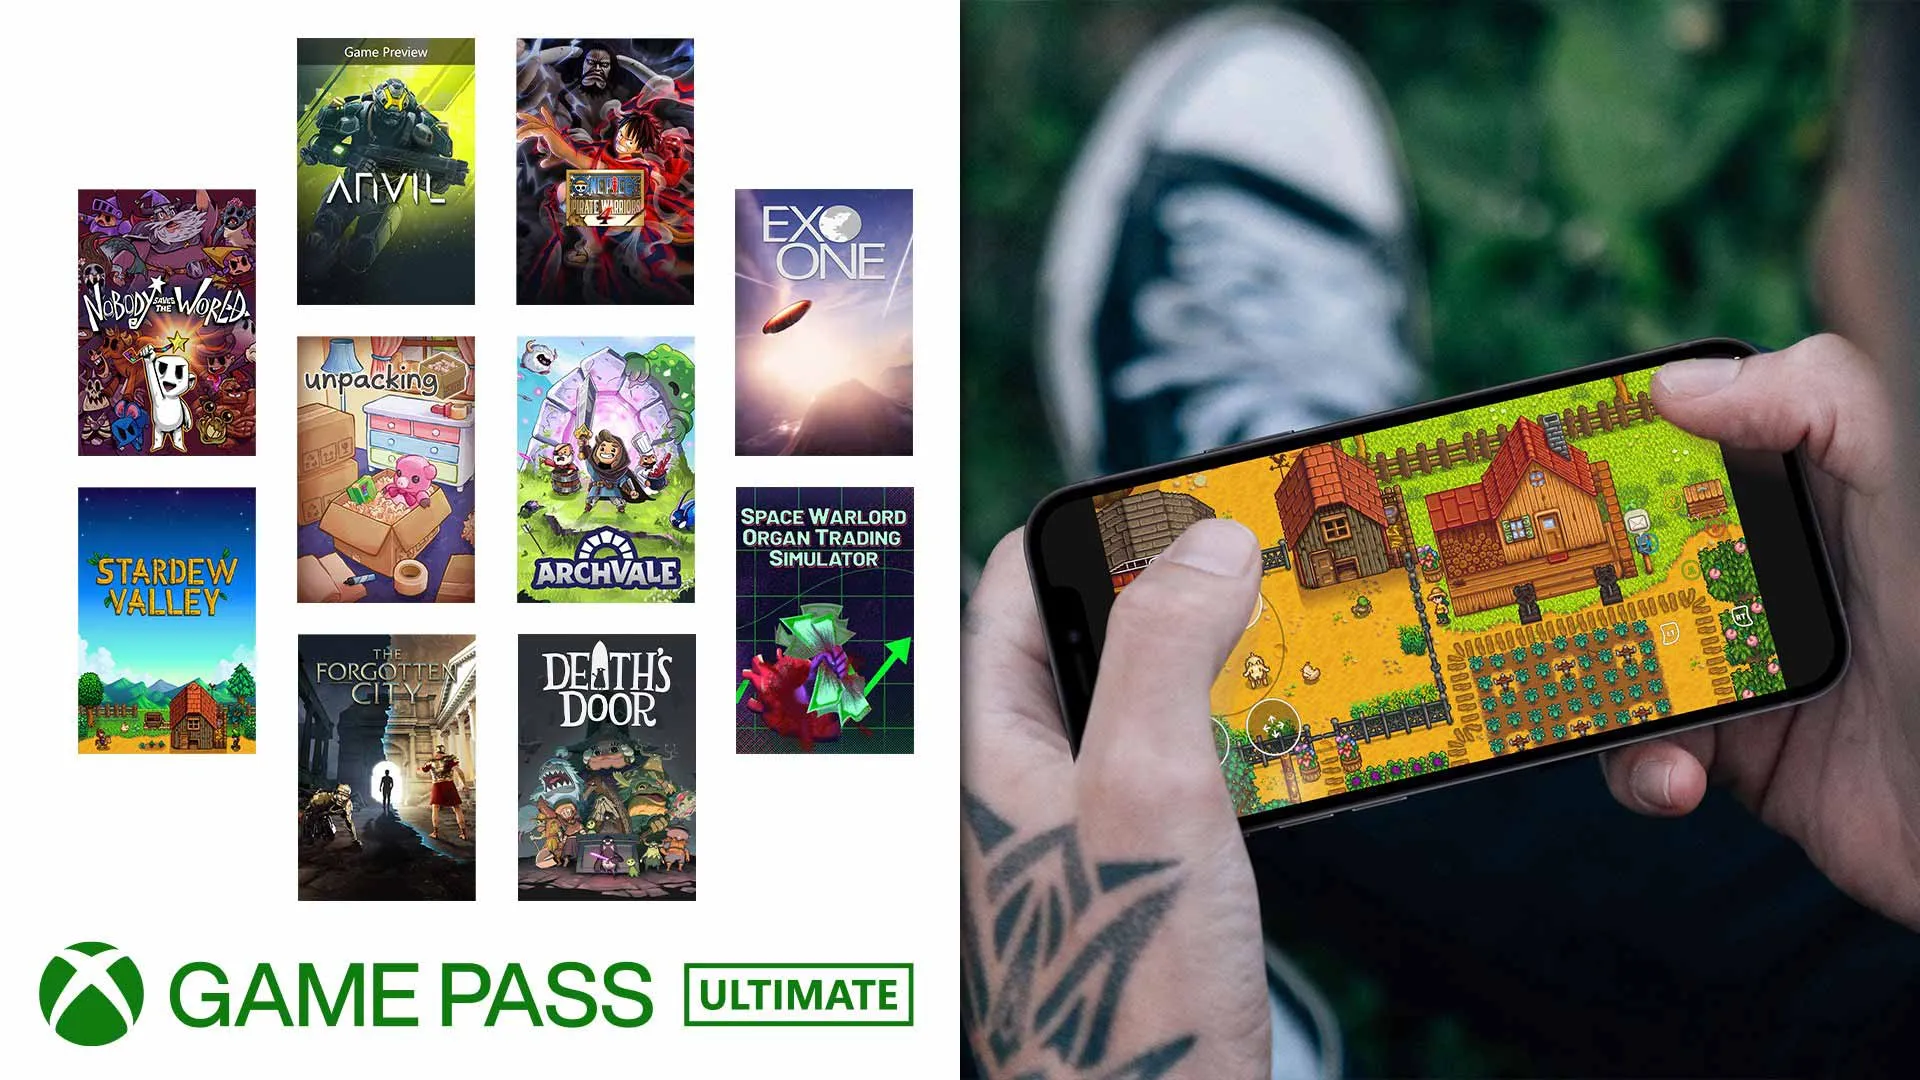 Stardew Valley, Unpacking, and more get touch controls on Xbox Game Pass